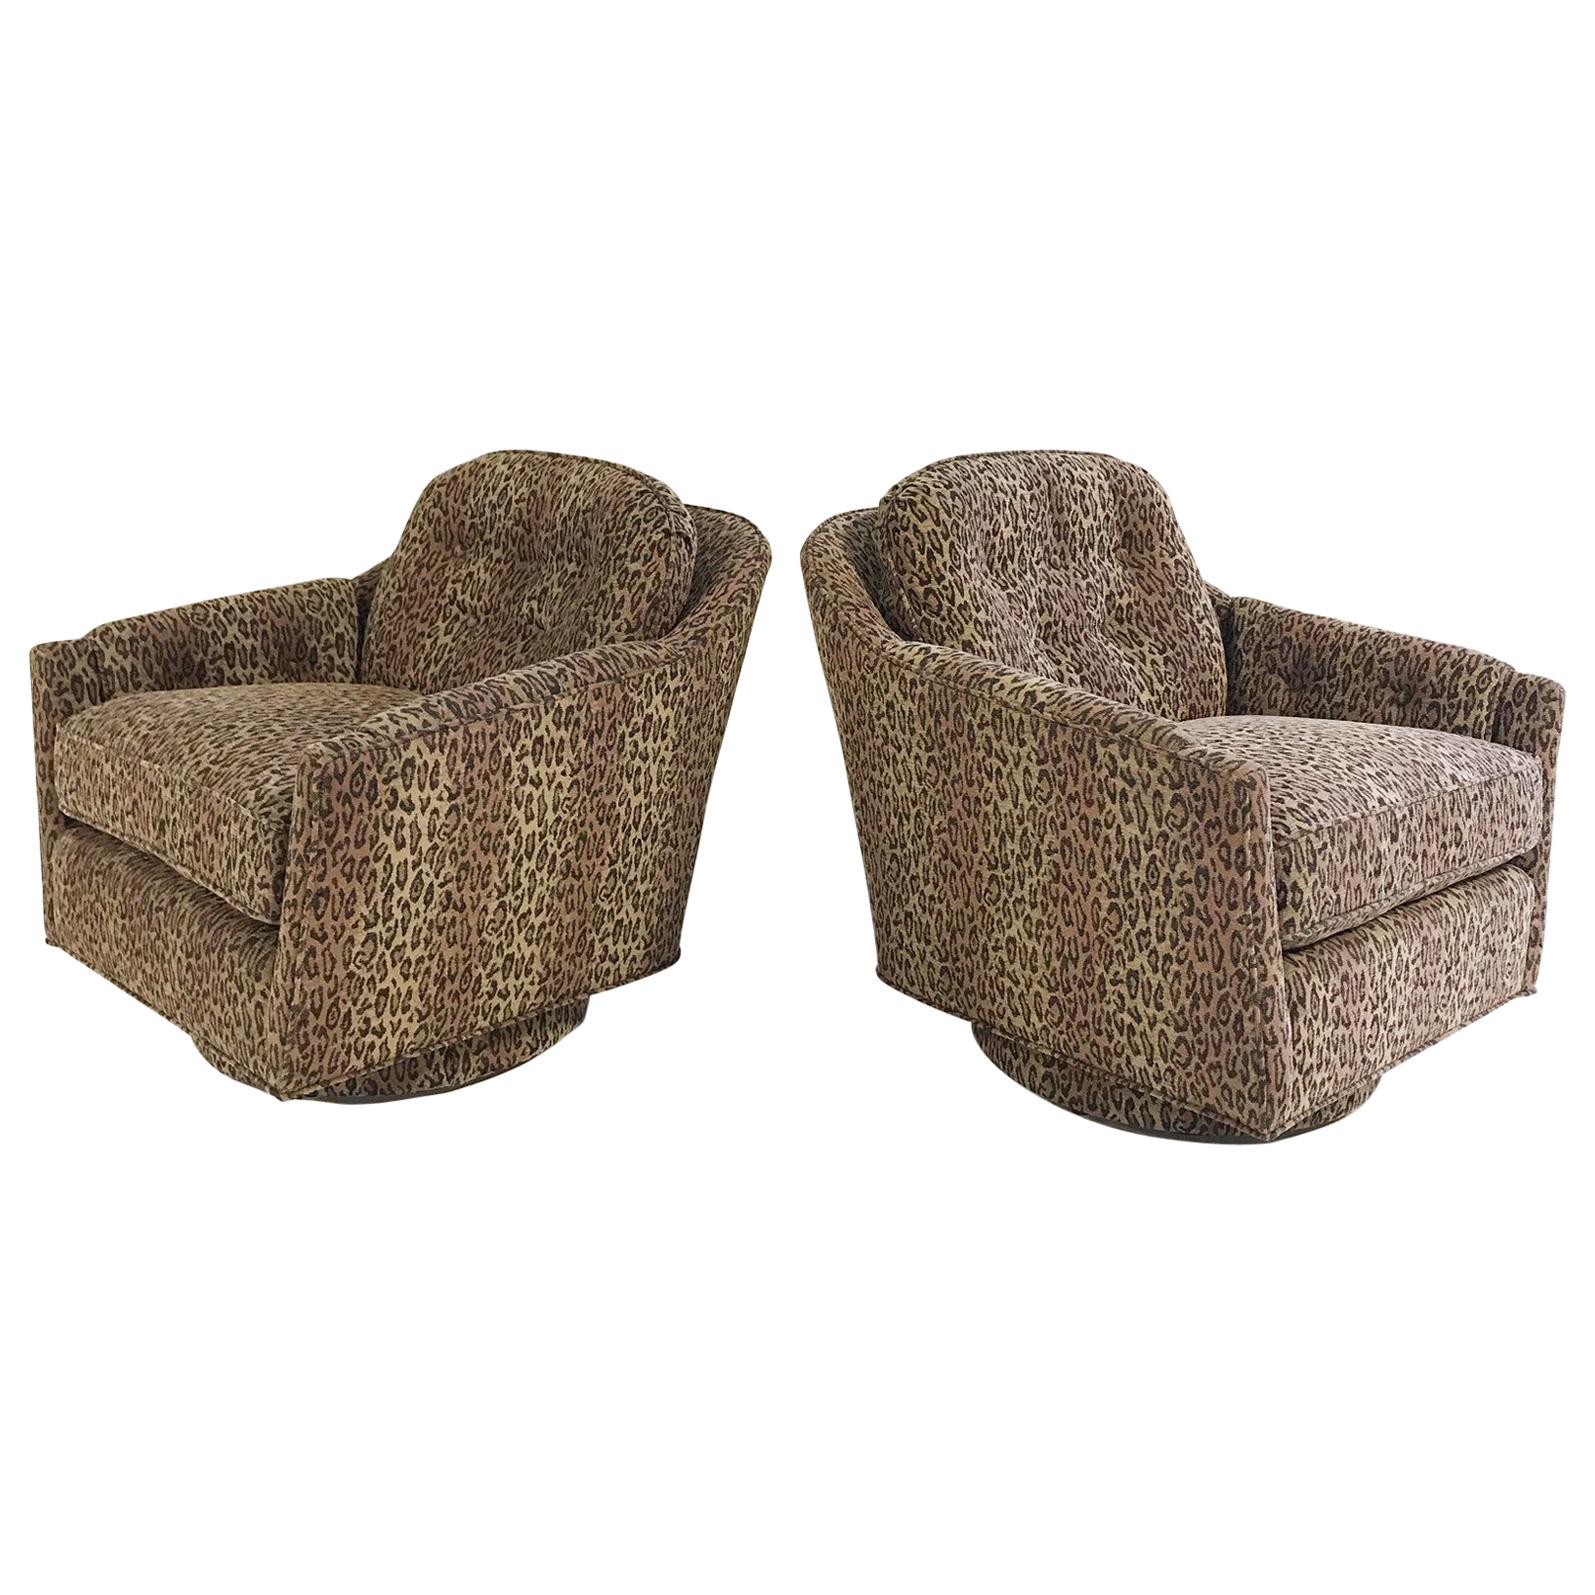 Swivel Lounge Chairs in the style of Milo Baughman, in Kravet Leopard Print For Sale